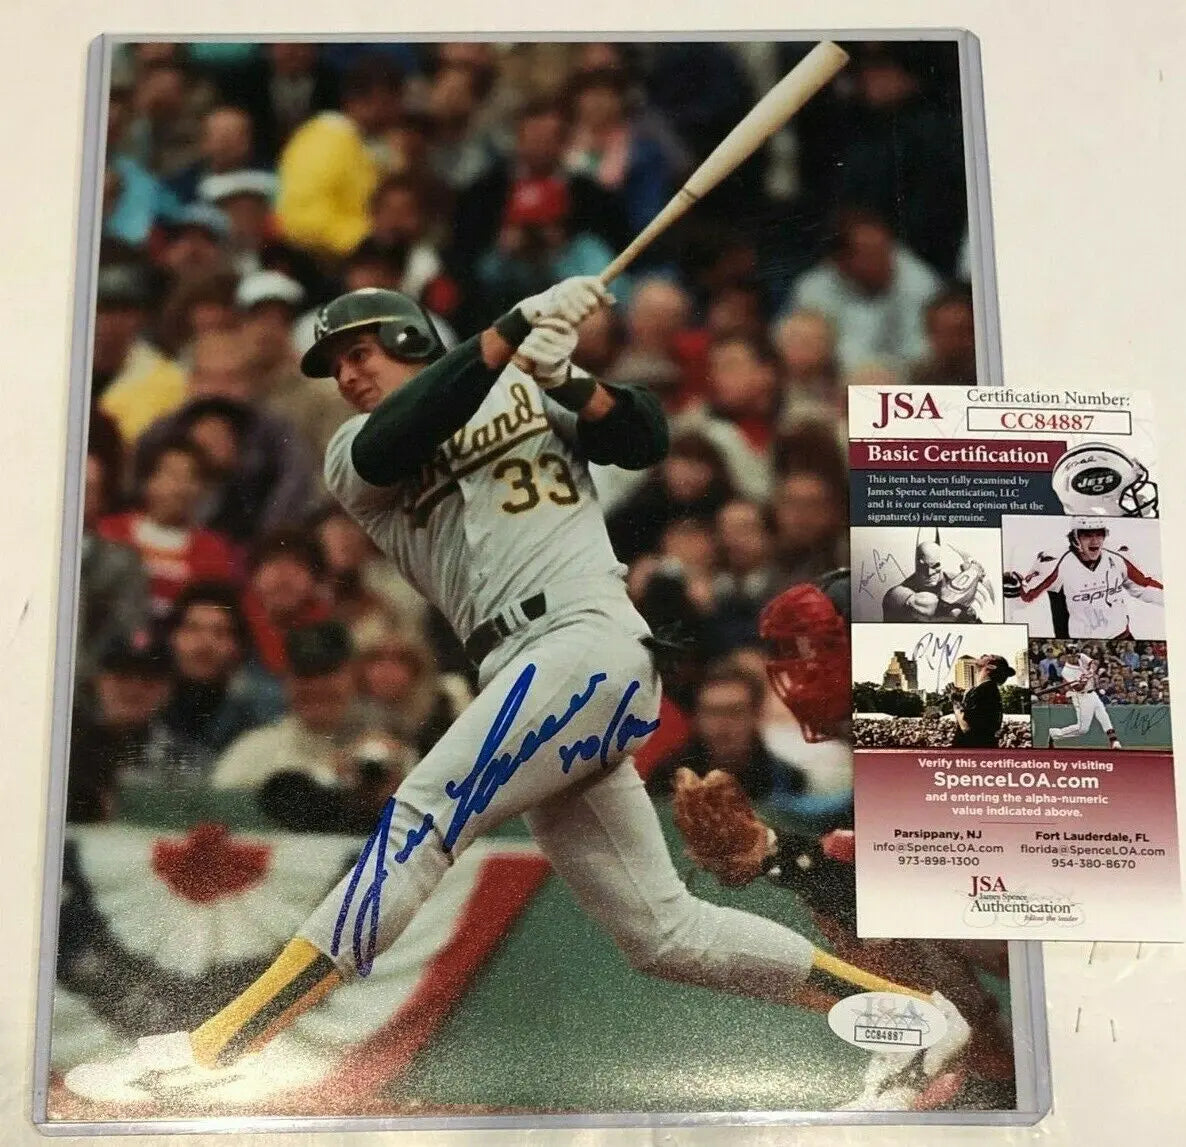 MVP Authentics Jose Canseco Autographed Signed Inscribed Oakland A's 8X10 Photo Jsa Coa 27 sports jersey framing , jersey framing